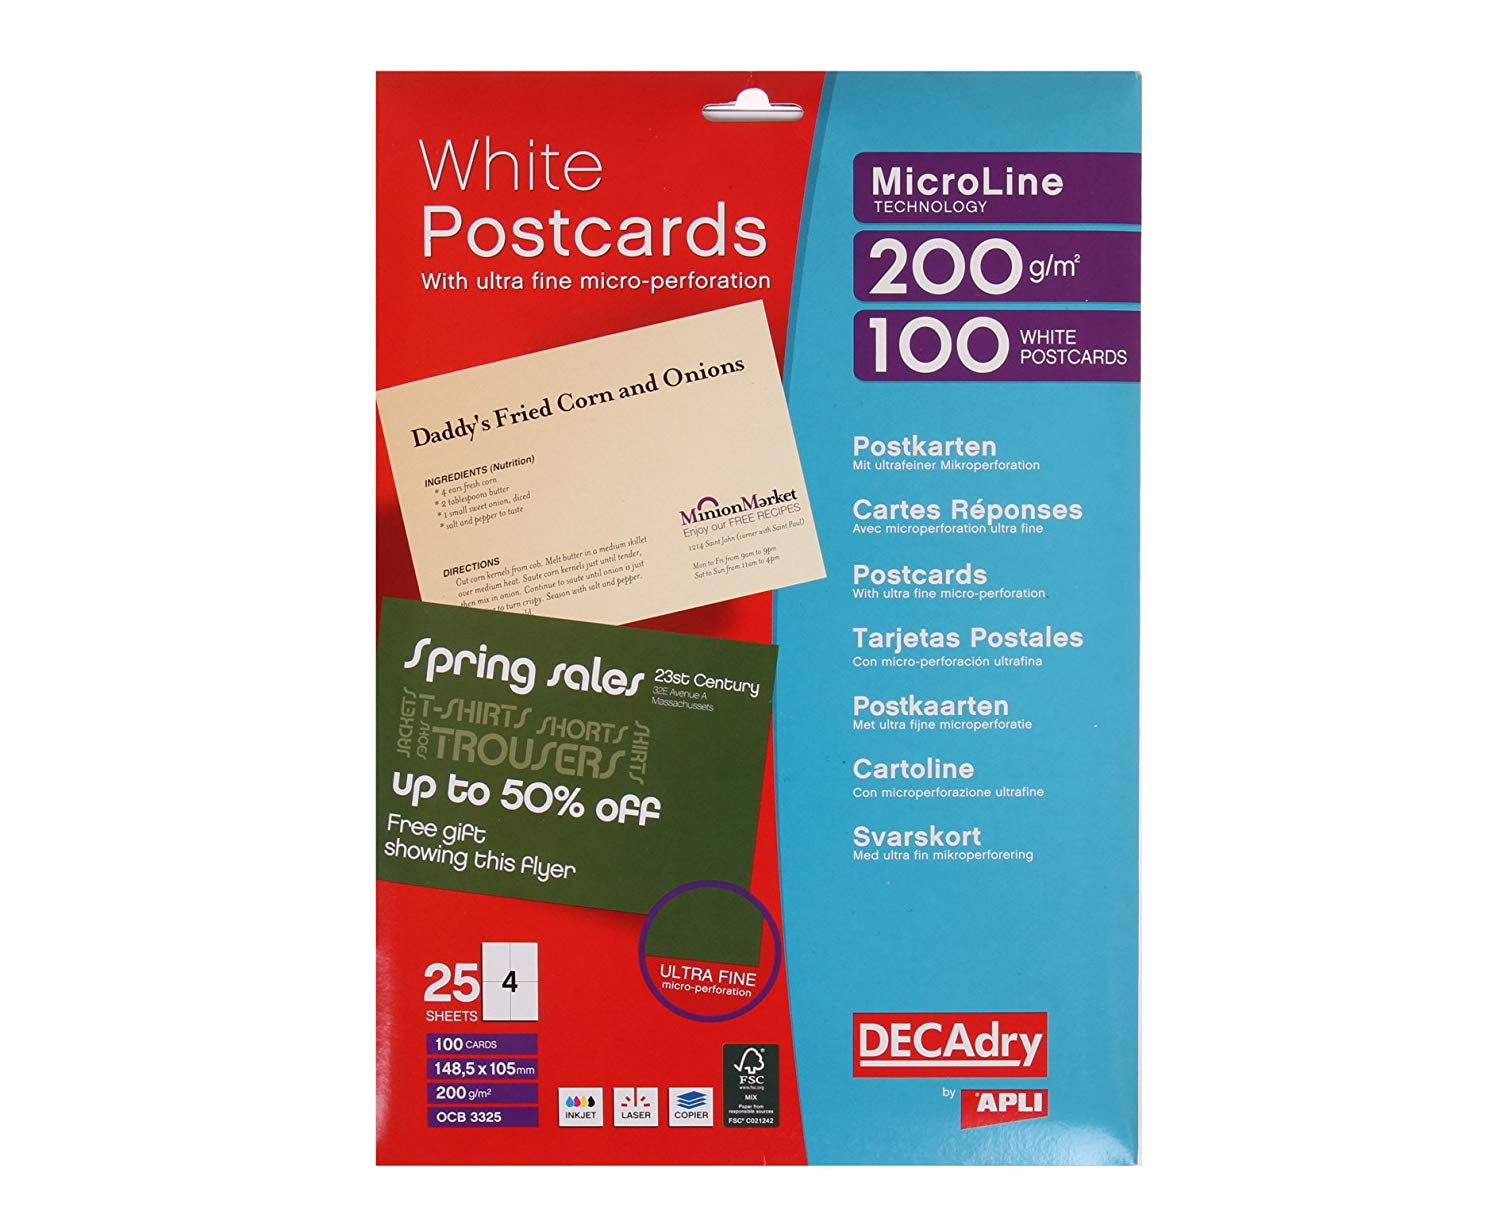 DECAdry White Postcards 200gsm Microperforated 4 per A4 Sheet 100 cards OCB 3325 